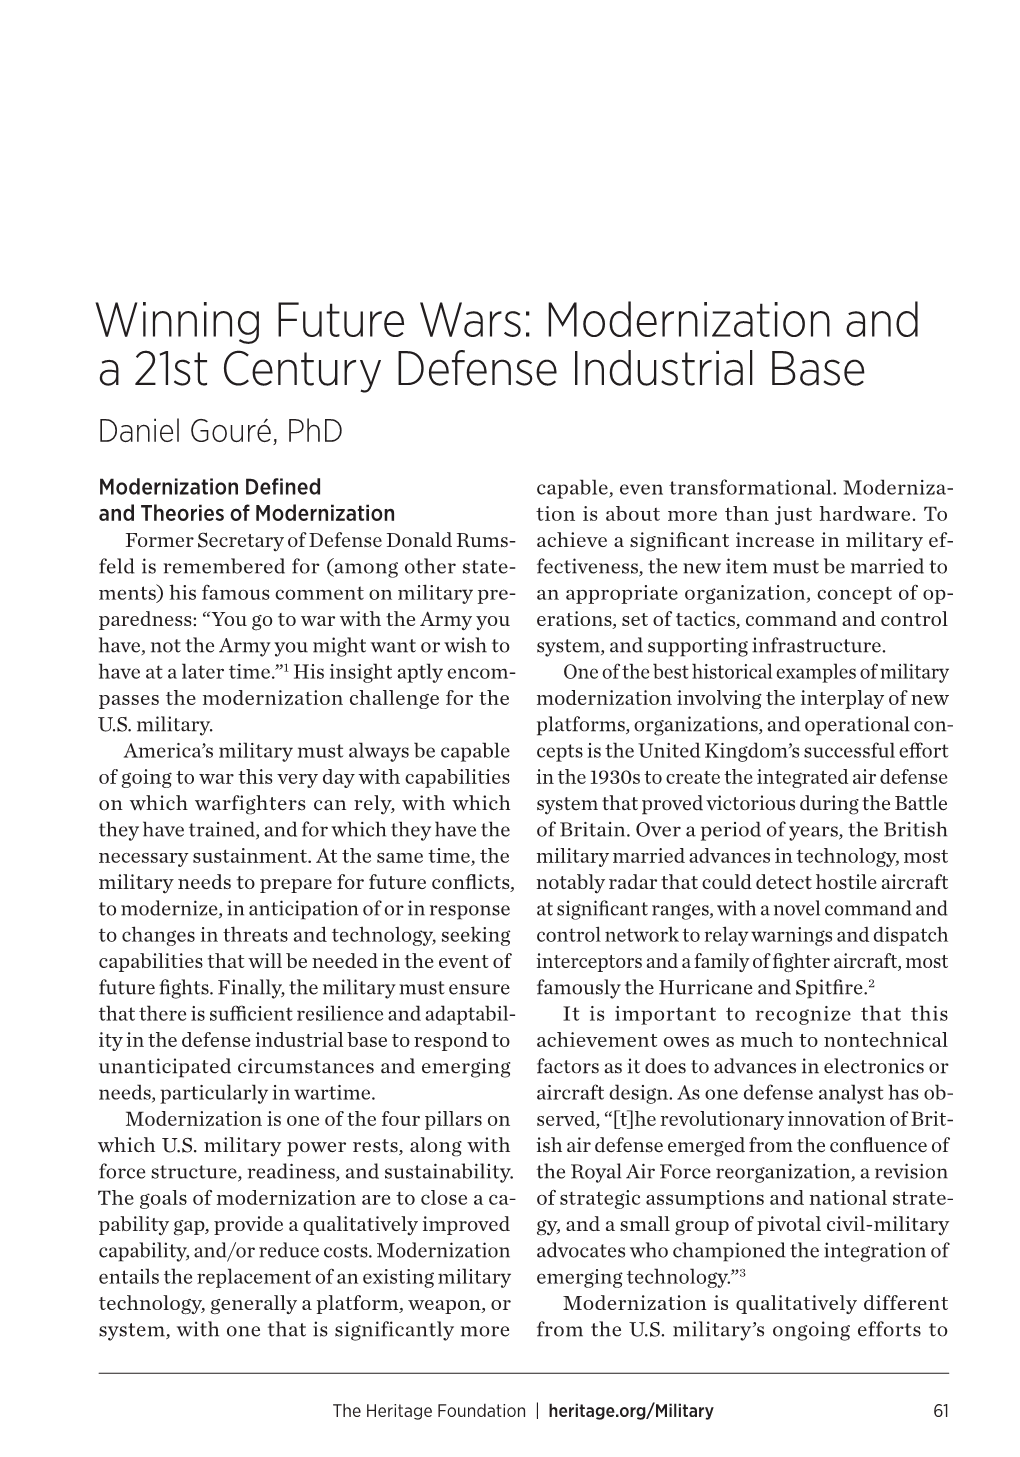 Modernization and a 21St Century Defense Industrial Base